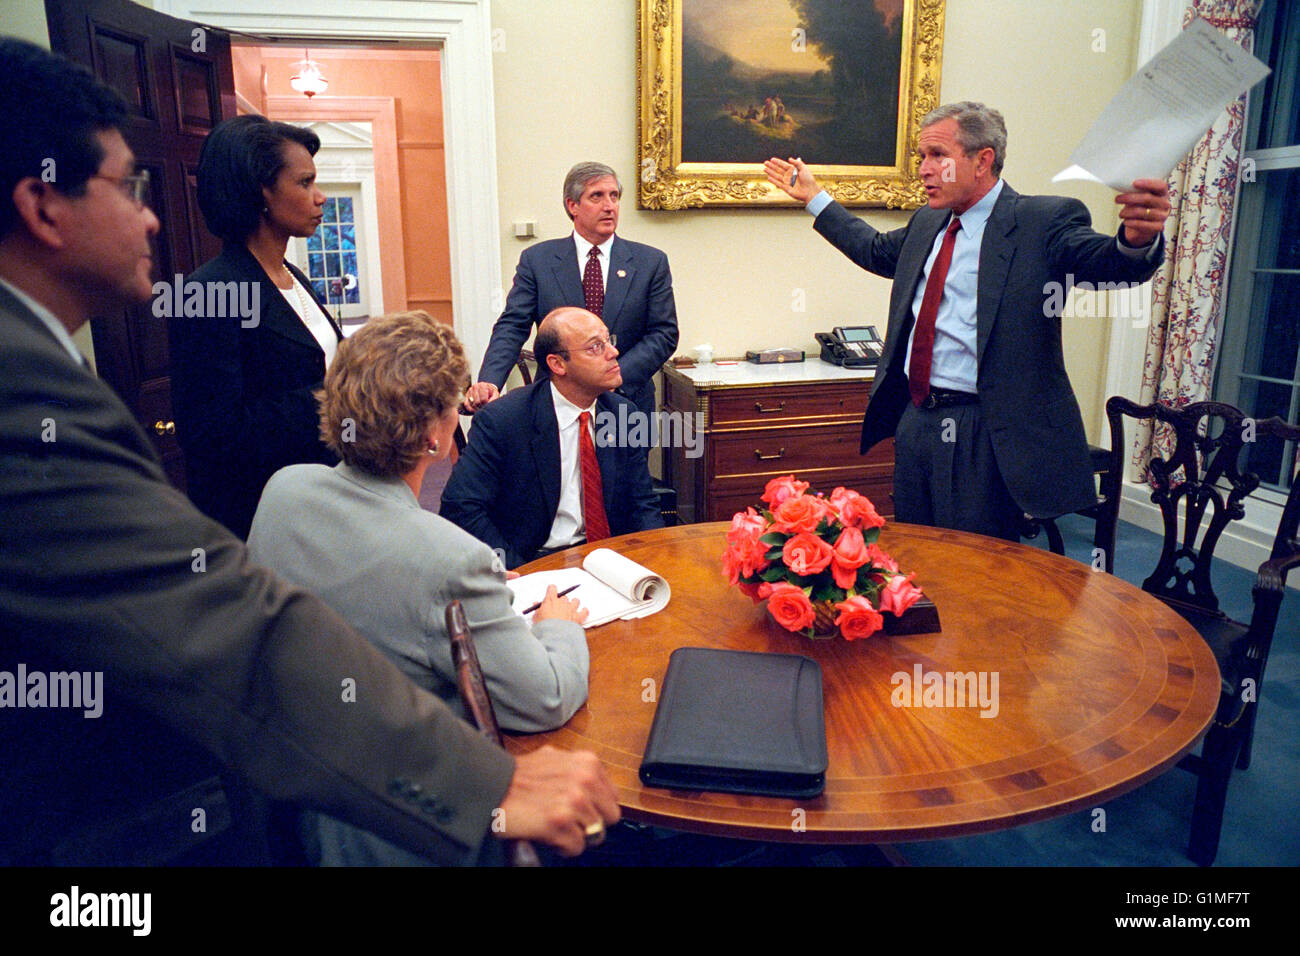 U.S President George W. Bush discusses his address to the nation with senior staff following the terror attacks in the Oval Office of the White House September 11, 2001 in Washington, DC. Pictured from left are: Alberto Gonzales, White House Counsel; Condoleezza Rice, National Security Adviser; Karen Hughes, Counselor; Ari Fleischer, Press Secretary, and Andy Card, Chief of Staff. Stock Photo